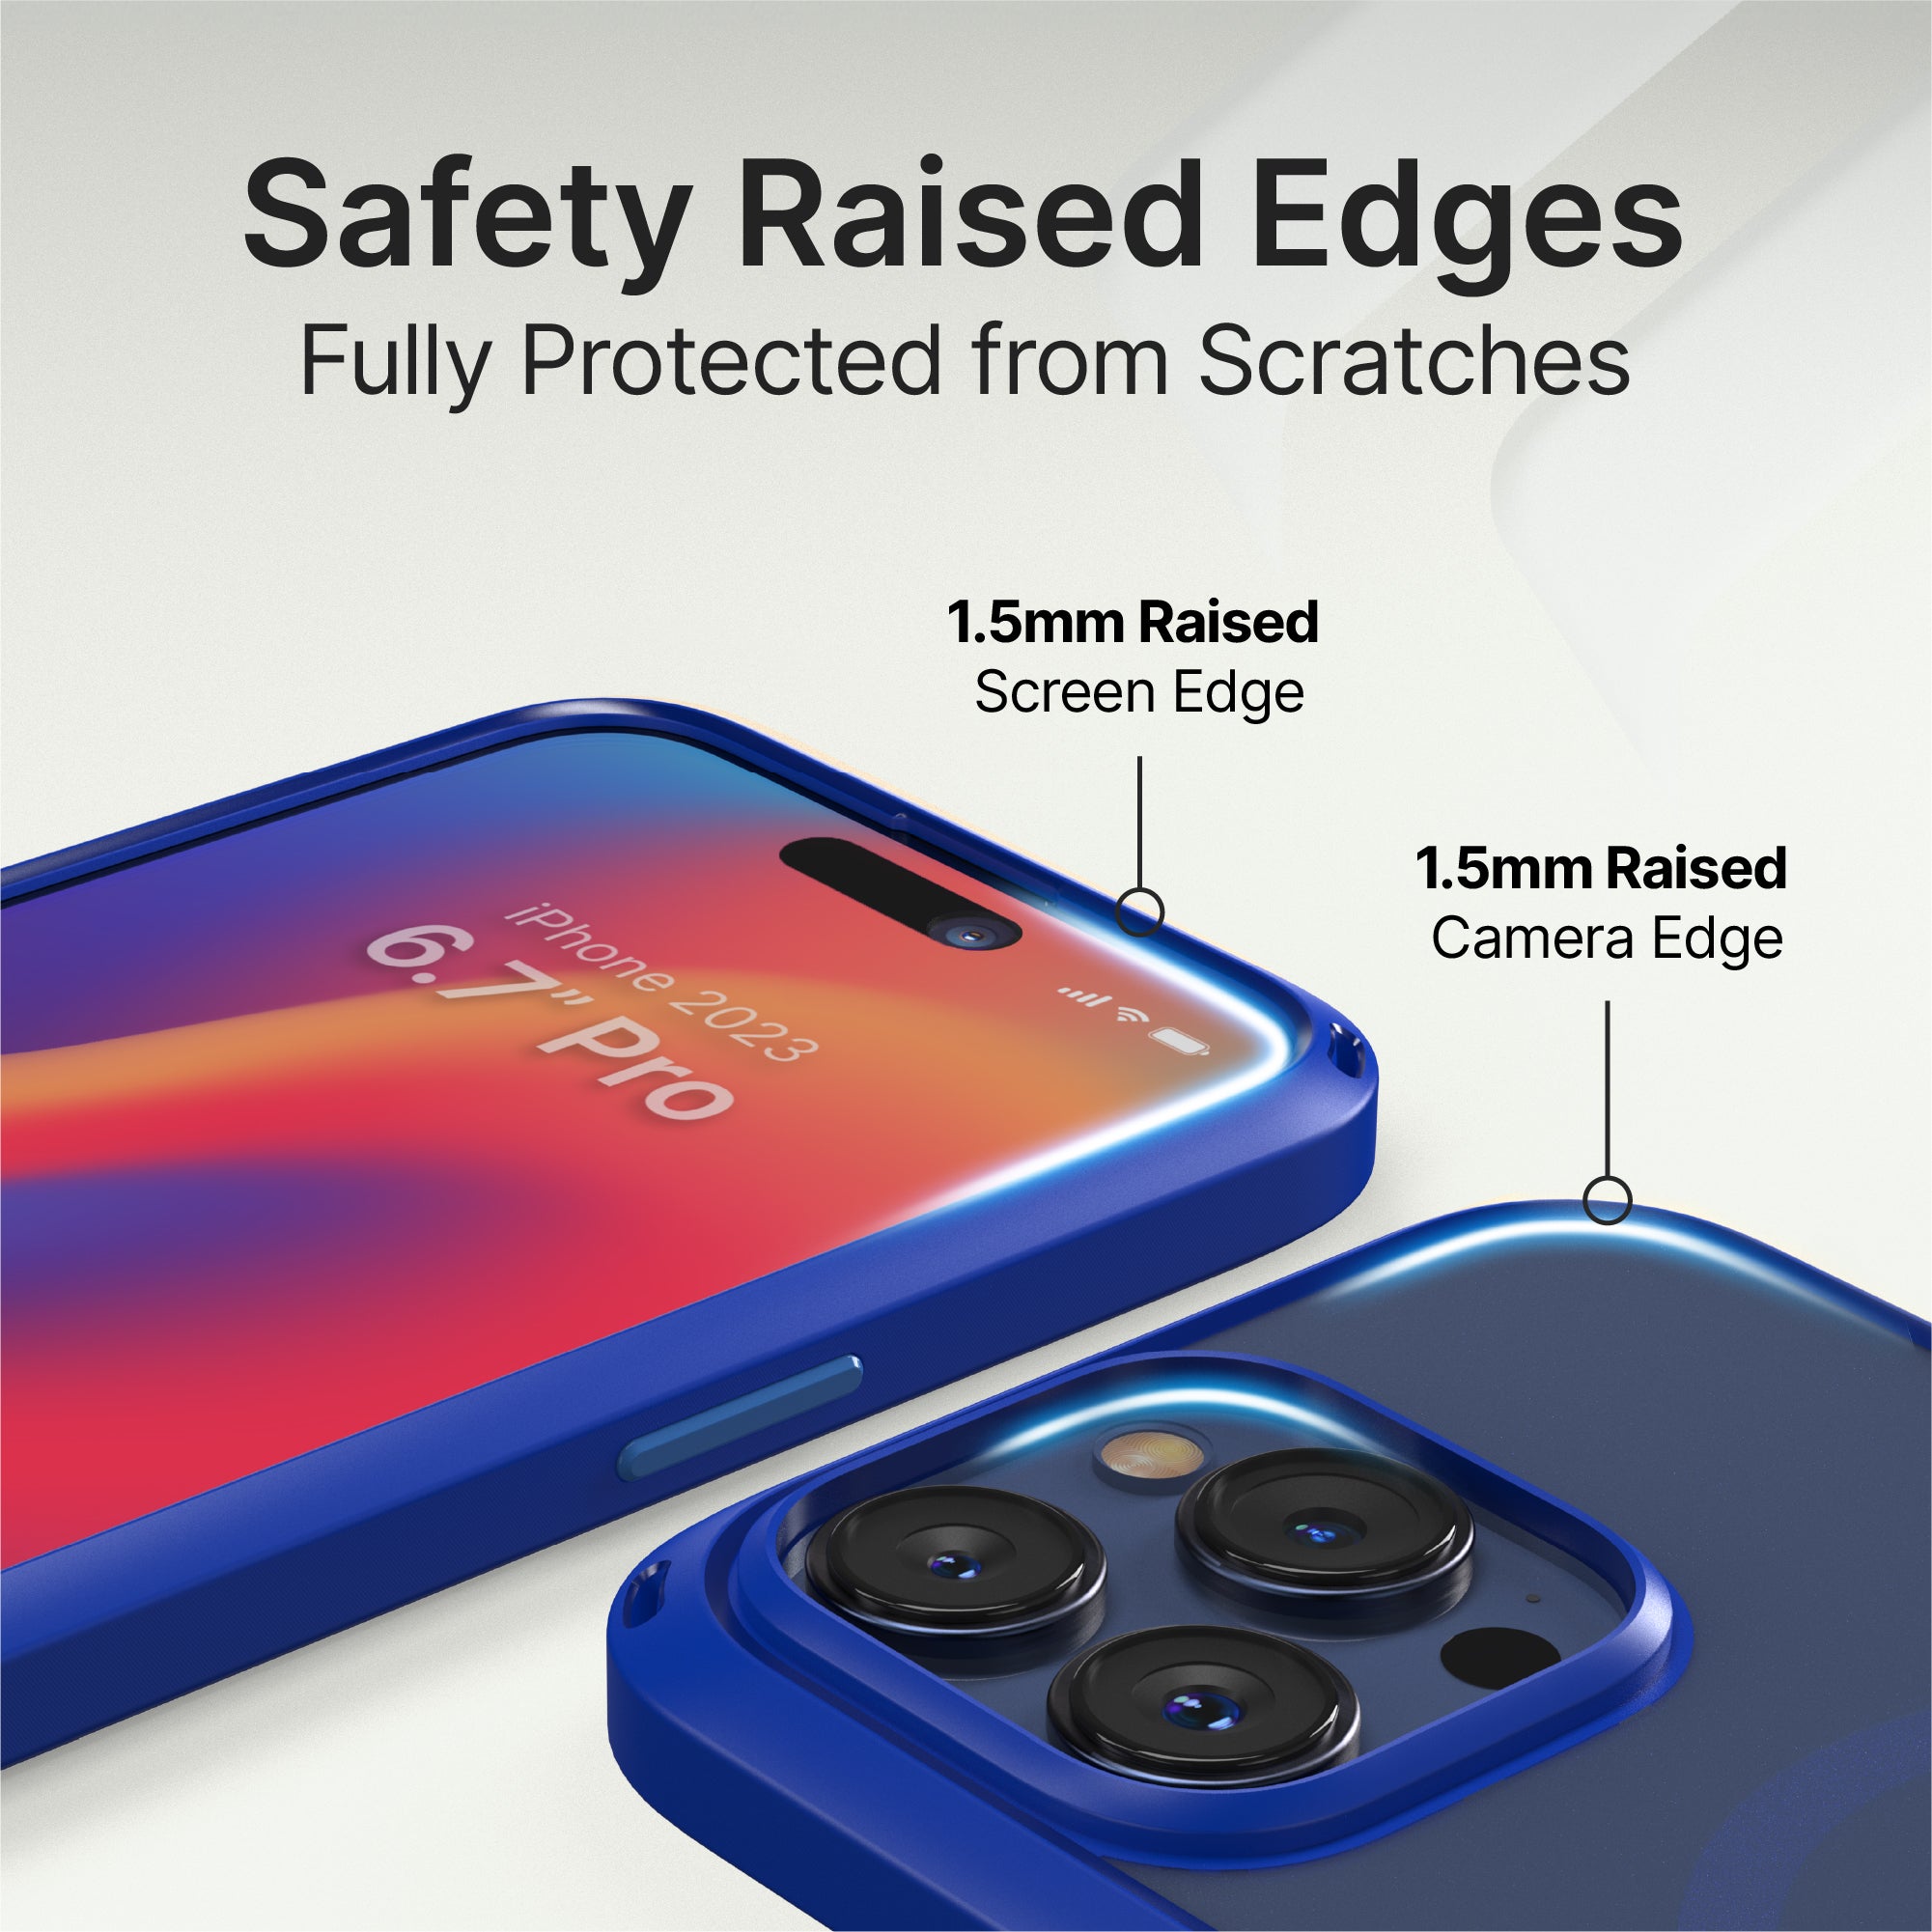 catalyst iphone 15 series influence case magsafe compatible atlantic blue for iphone 15 pro max showing the safety raised edges for camera and screen text reads safety raised edges fully protected from scratches 1.5mm raised screen edge 1.5mm raised camera edge